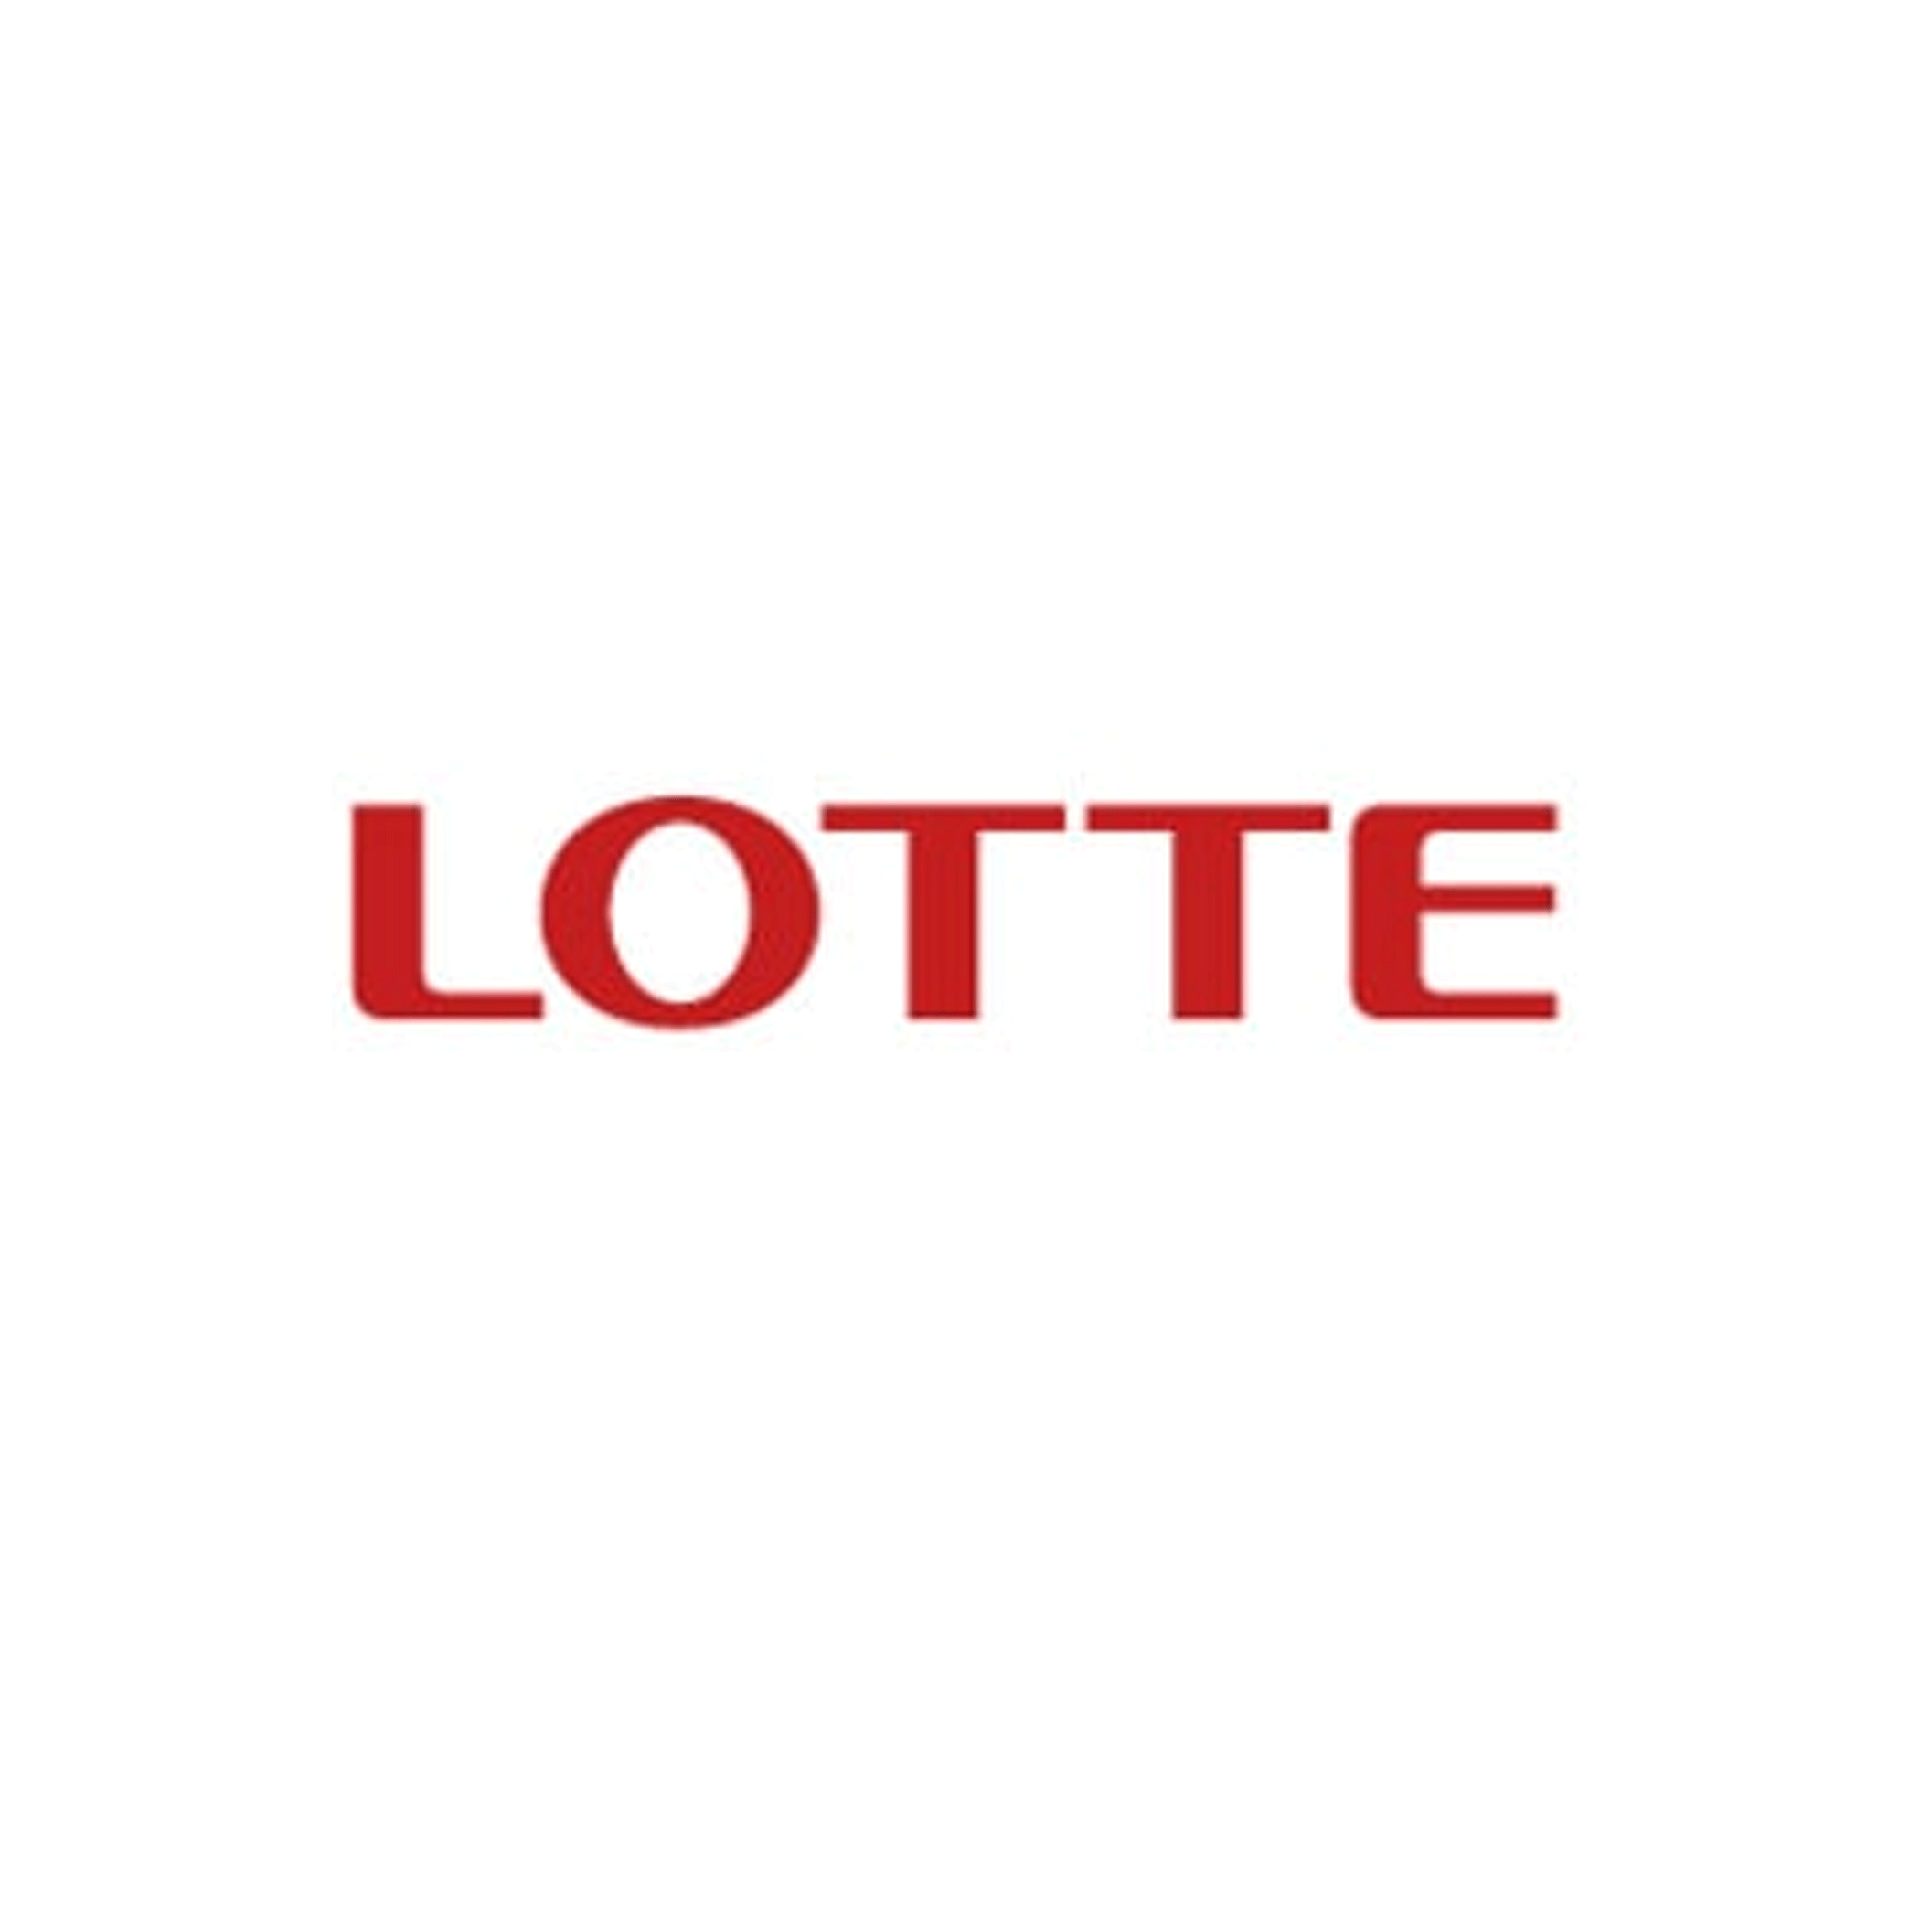 Product Brand: Lotte